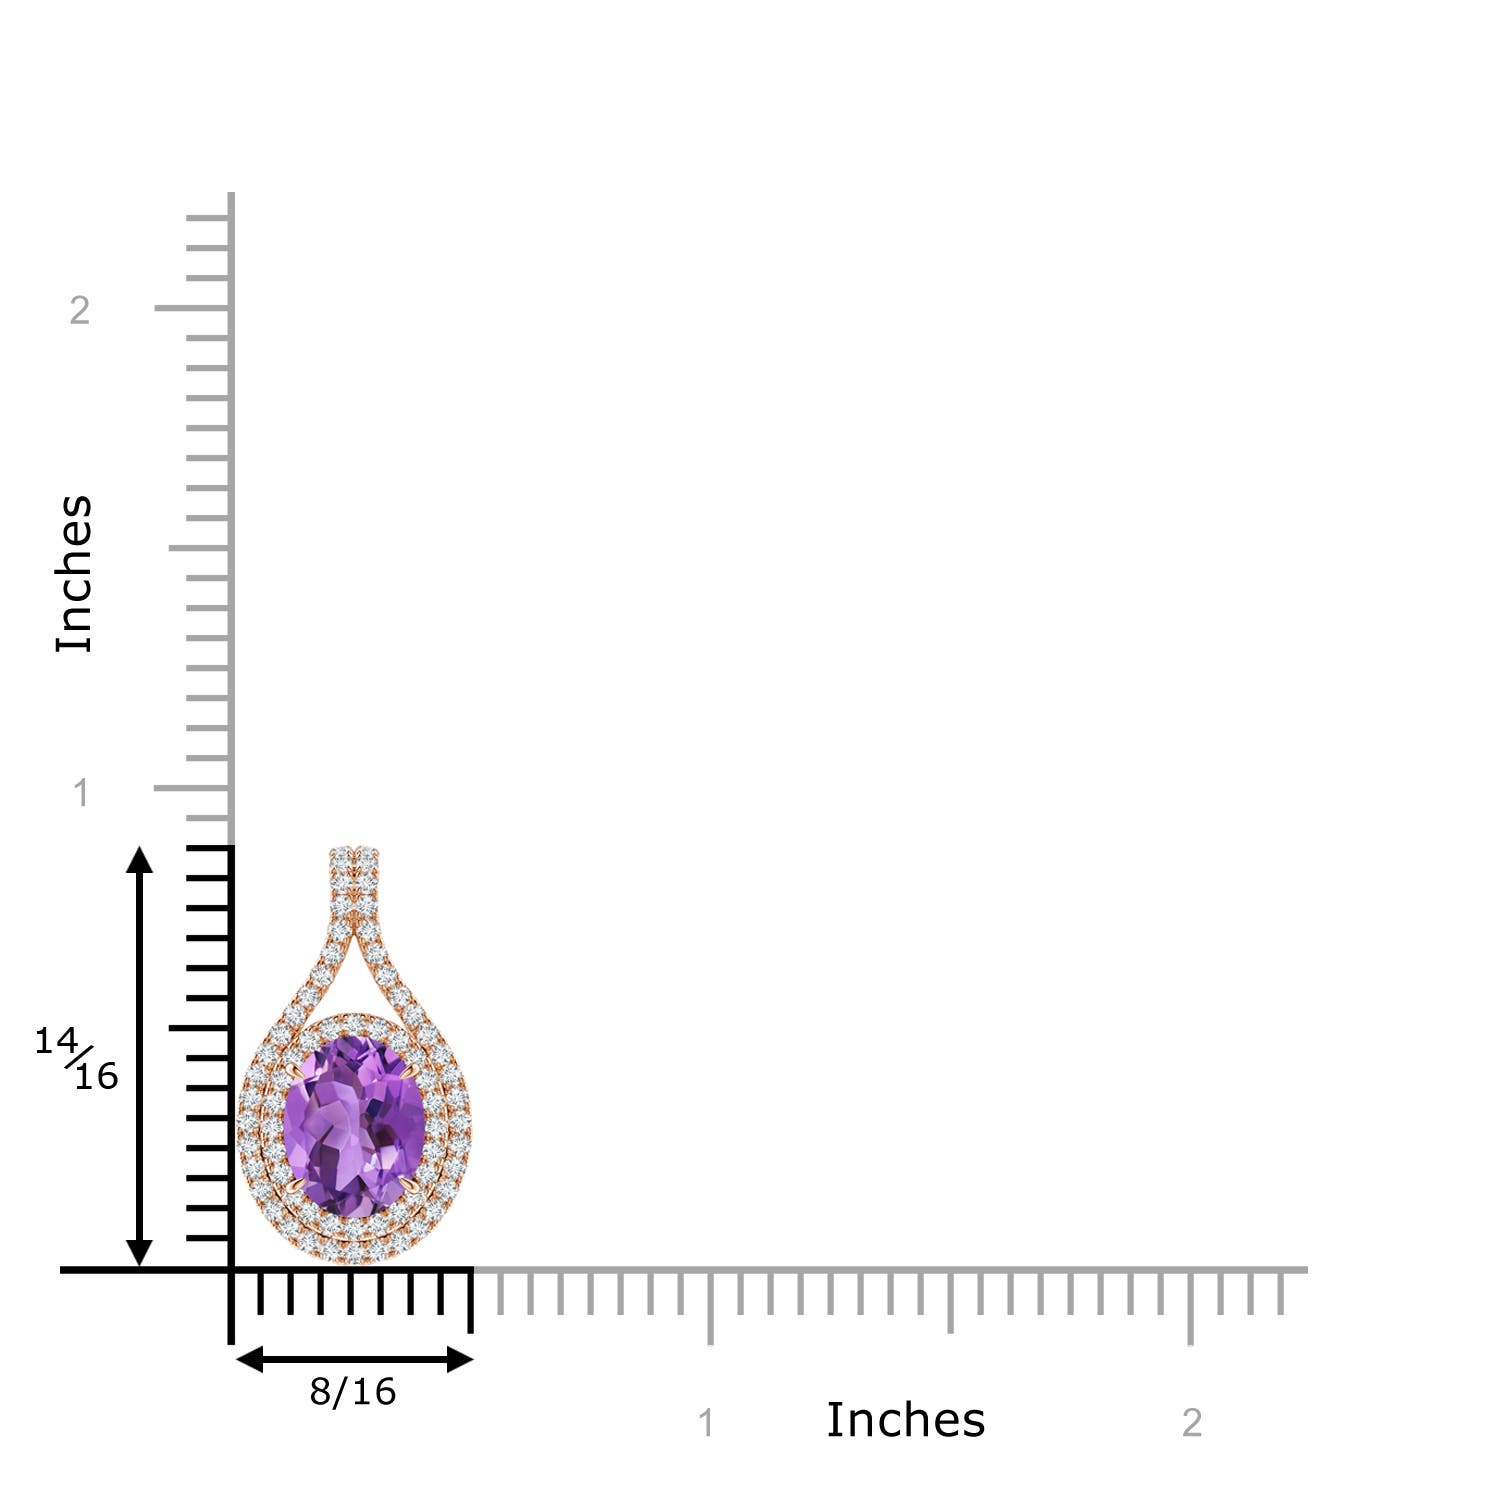 AA - Amethyst / 1.95 CT / 14 KT Rose Gold